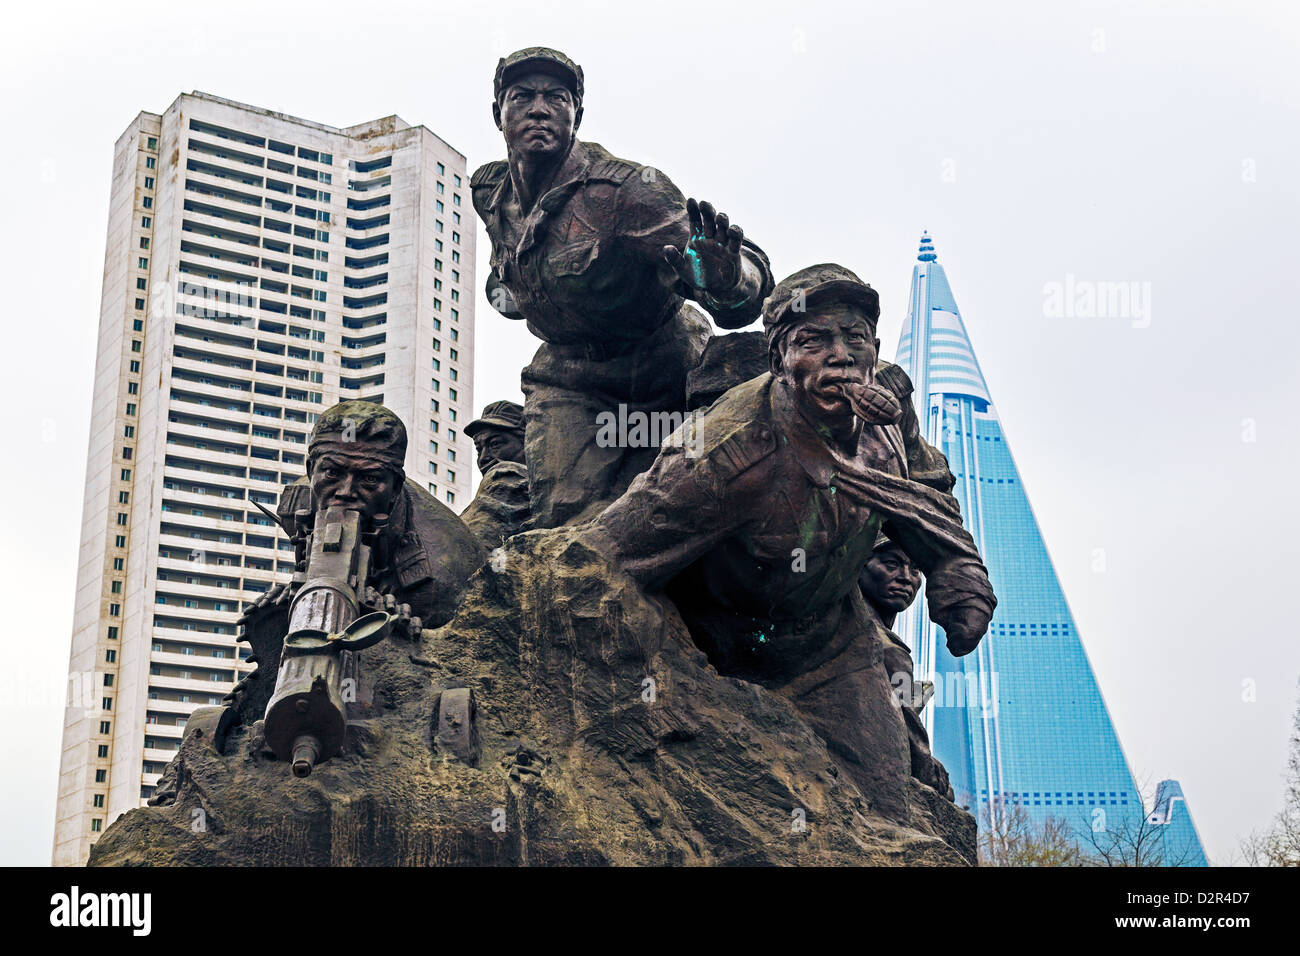 Statue illustrating the War for Independence, Monument to the Victorious Fatherland Liberation war, Pyongyang, North Korea Stock Photo